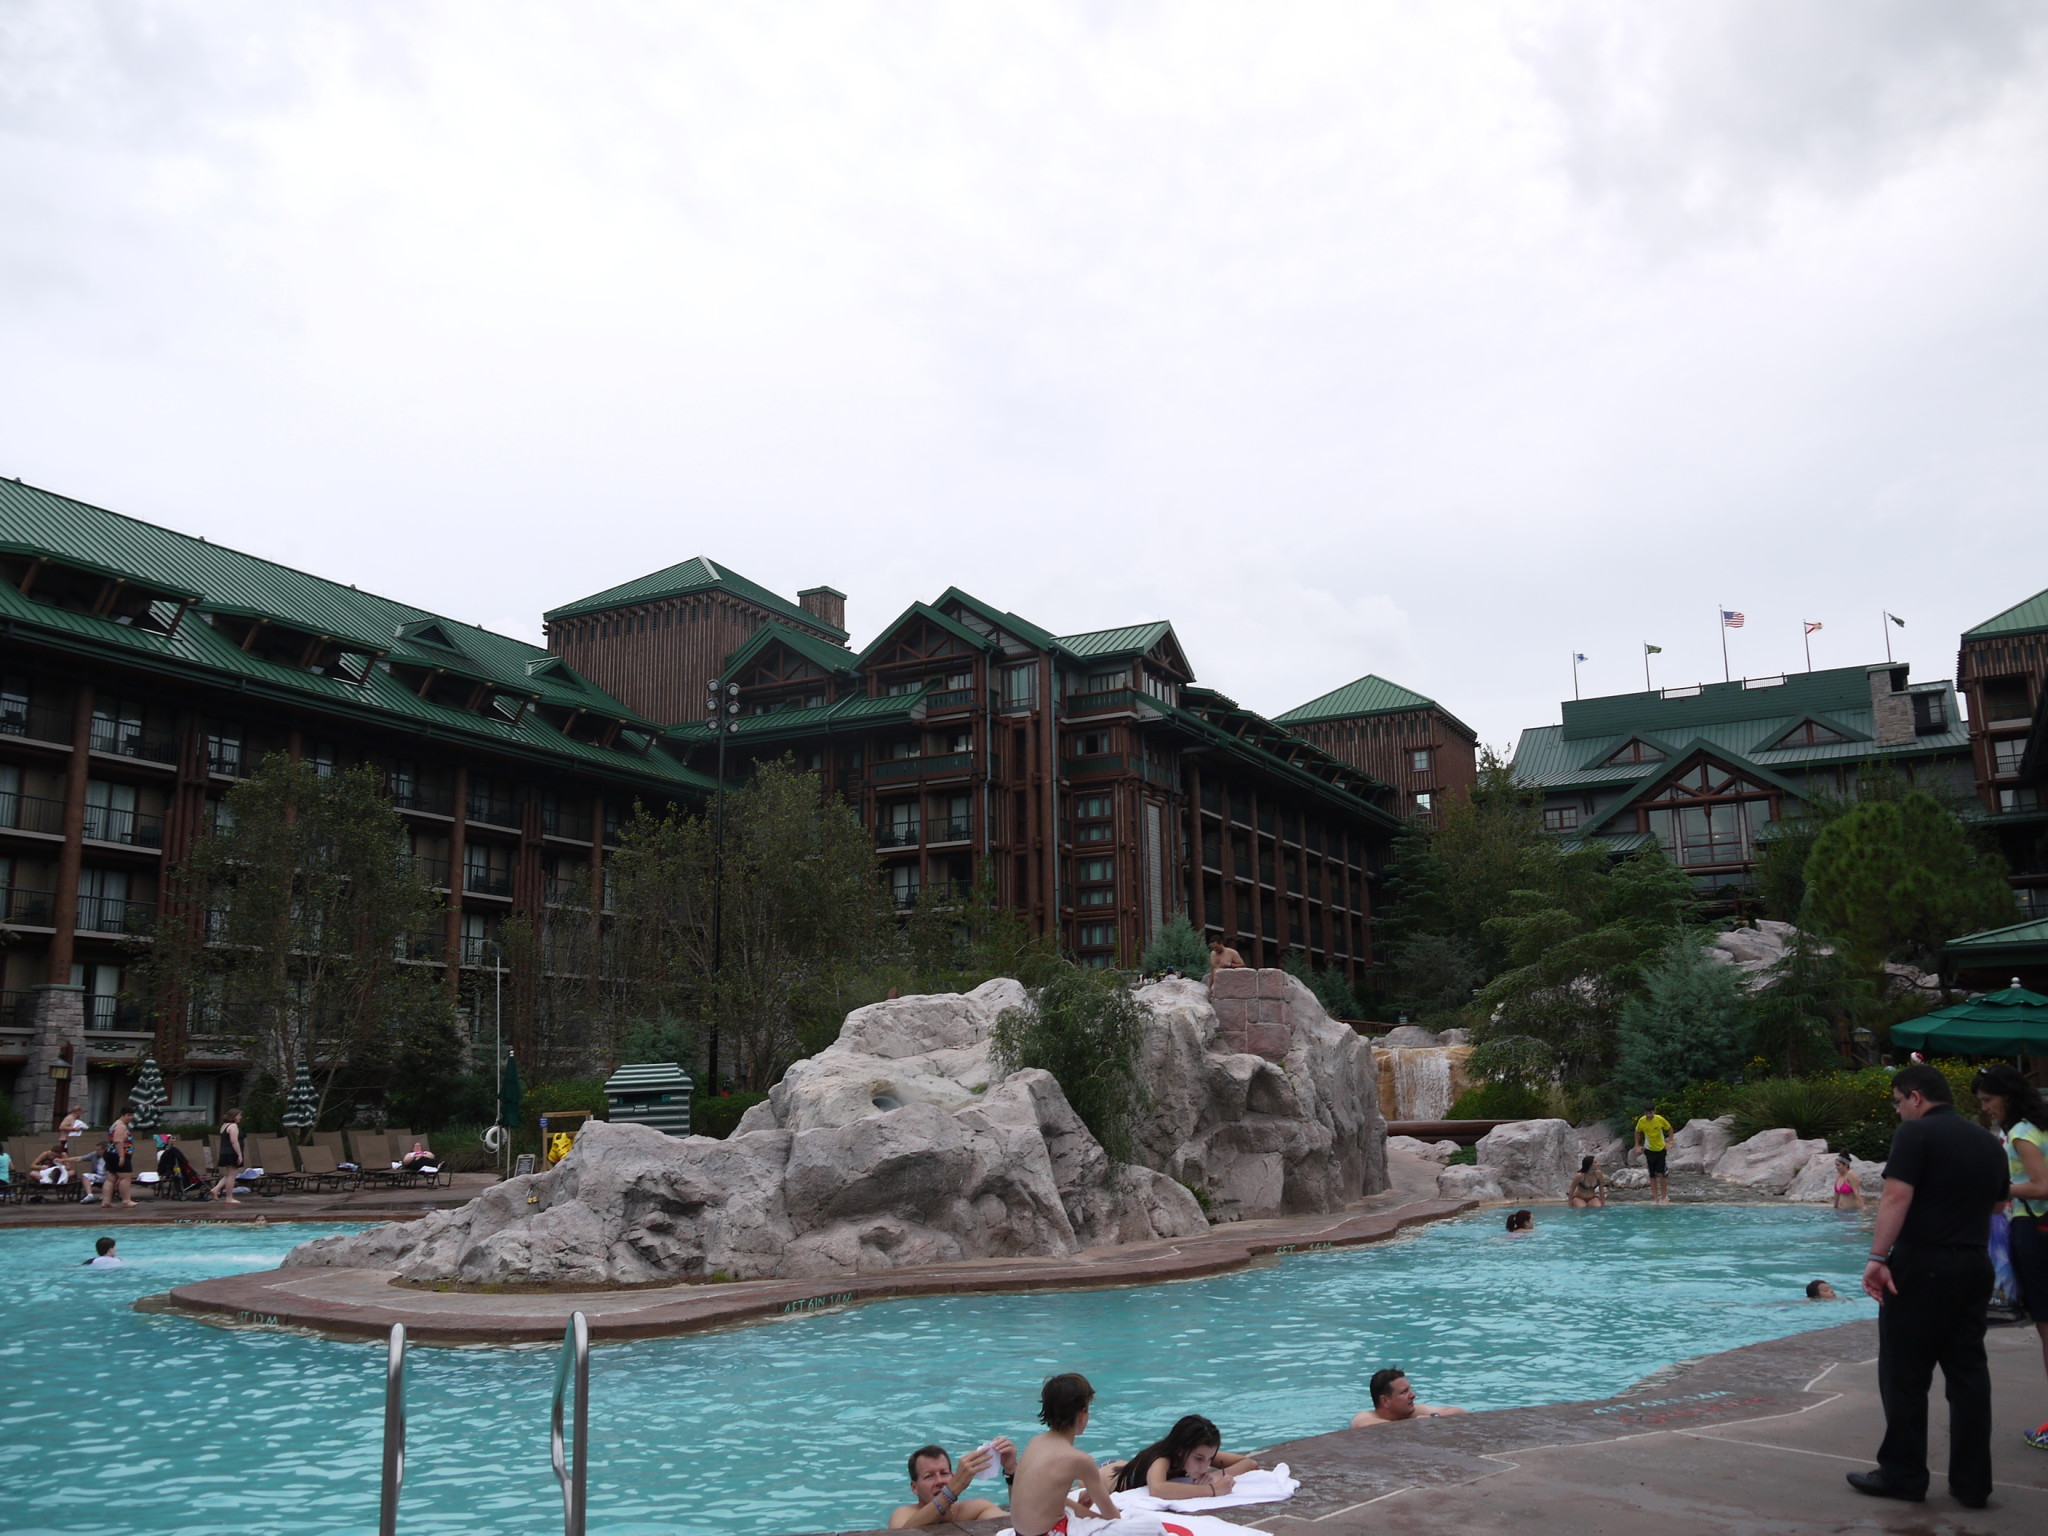 The Main Pool at the Wilderness Lodge will be Closed Later this Year